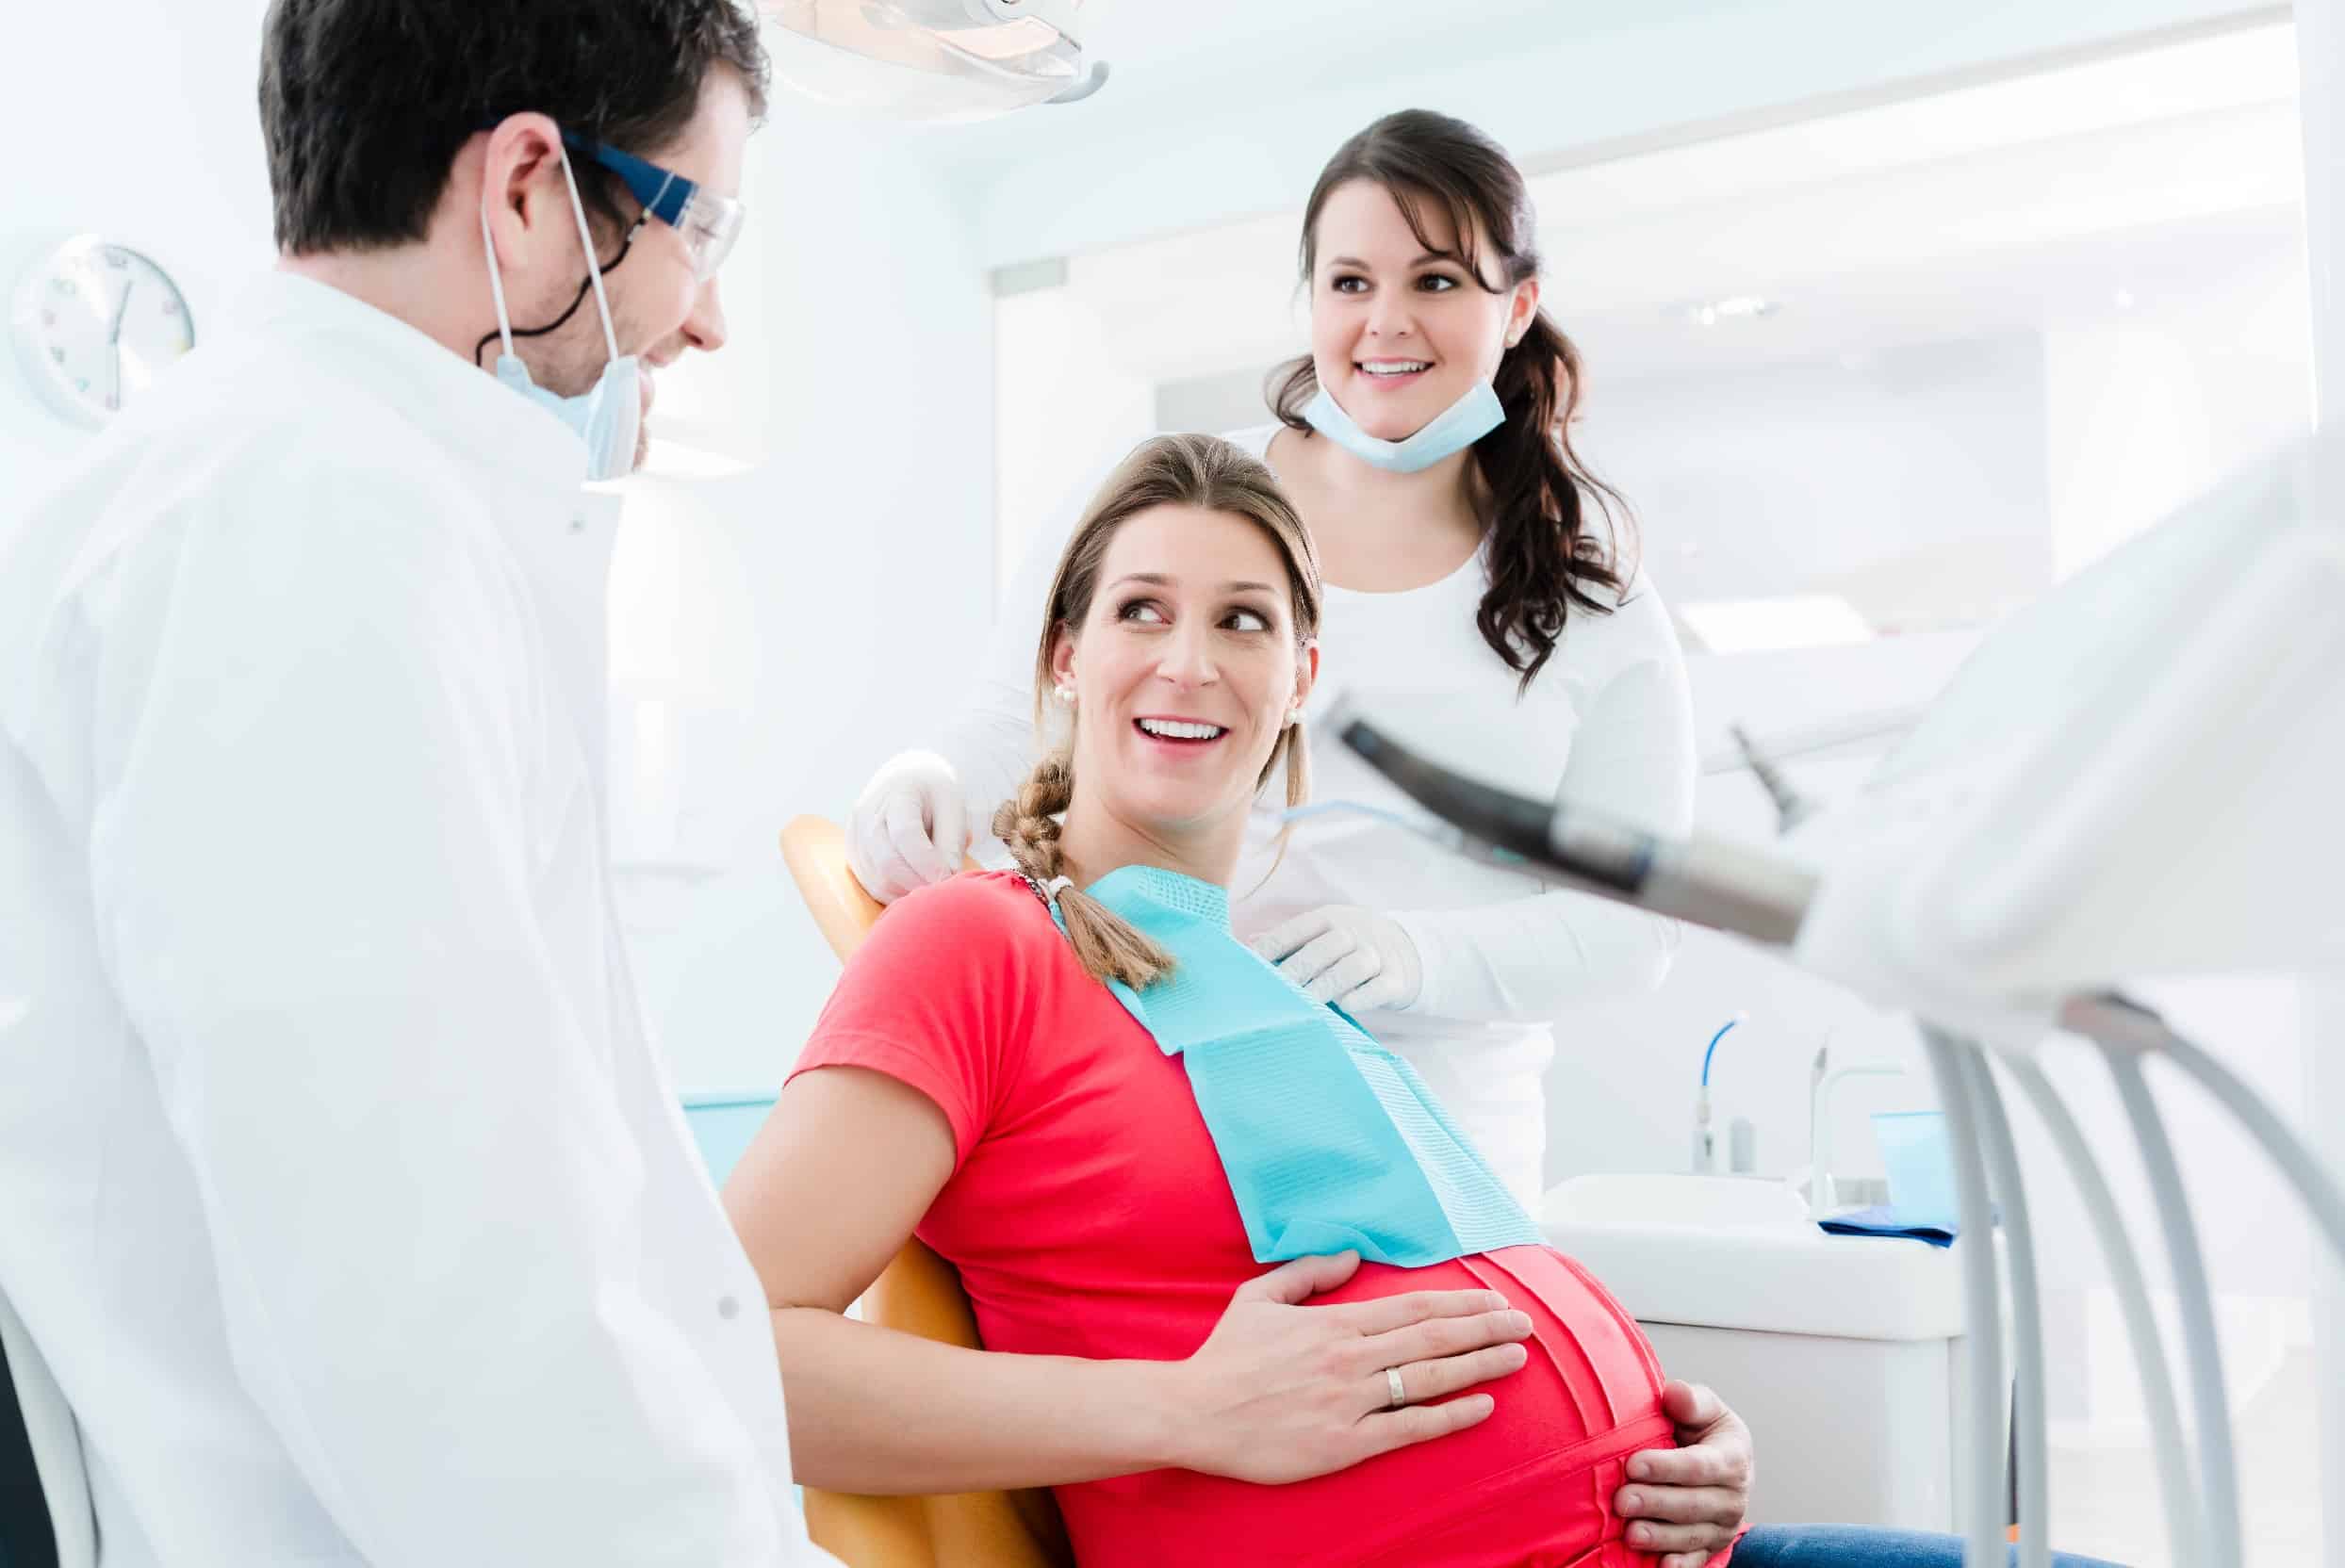 About the dentist and pregnancy